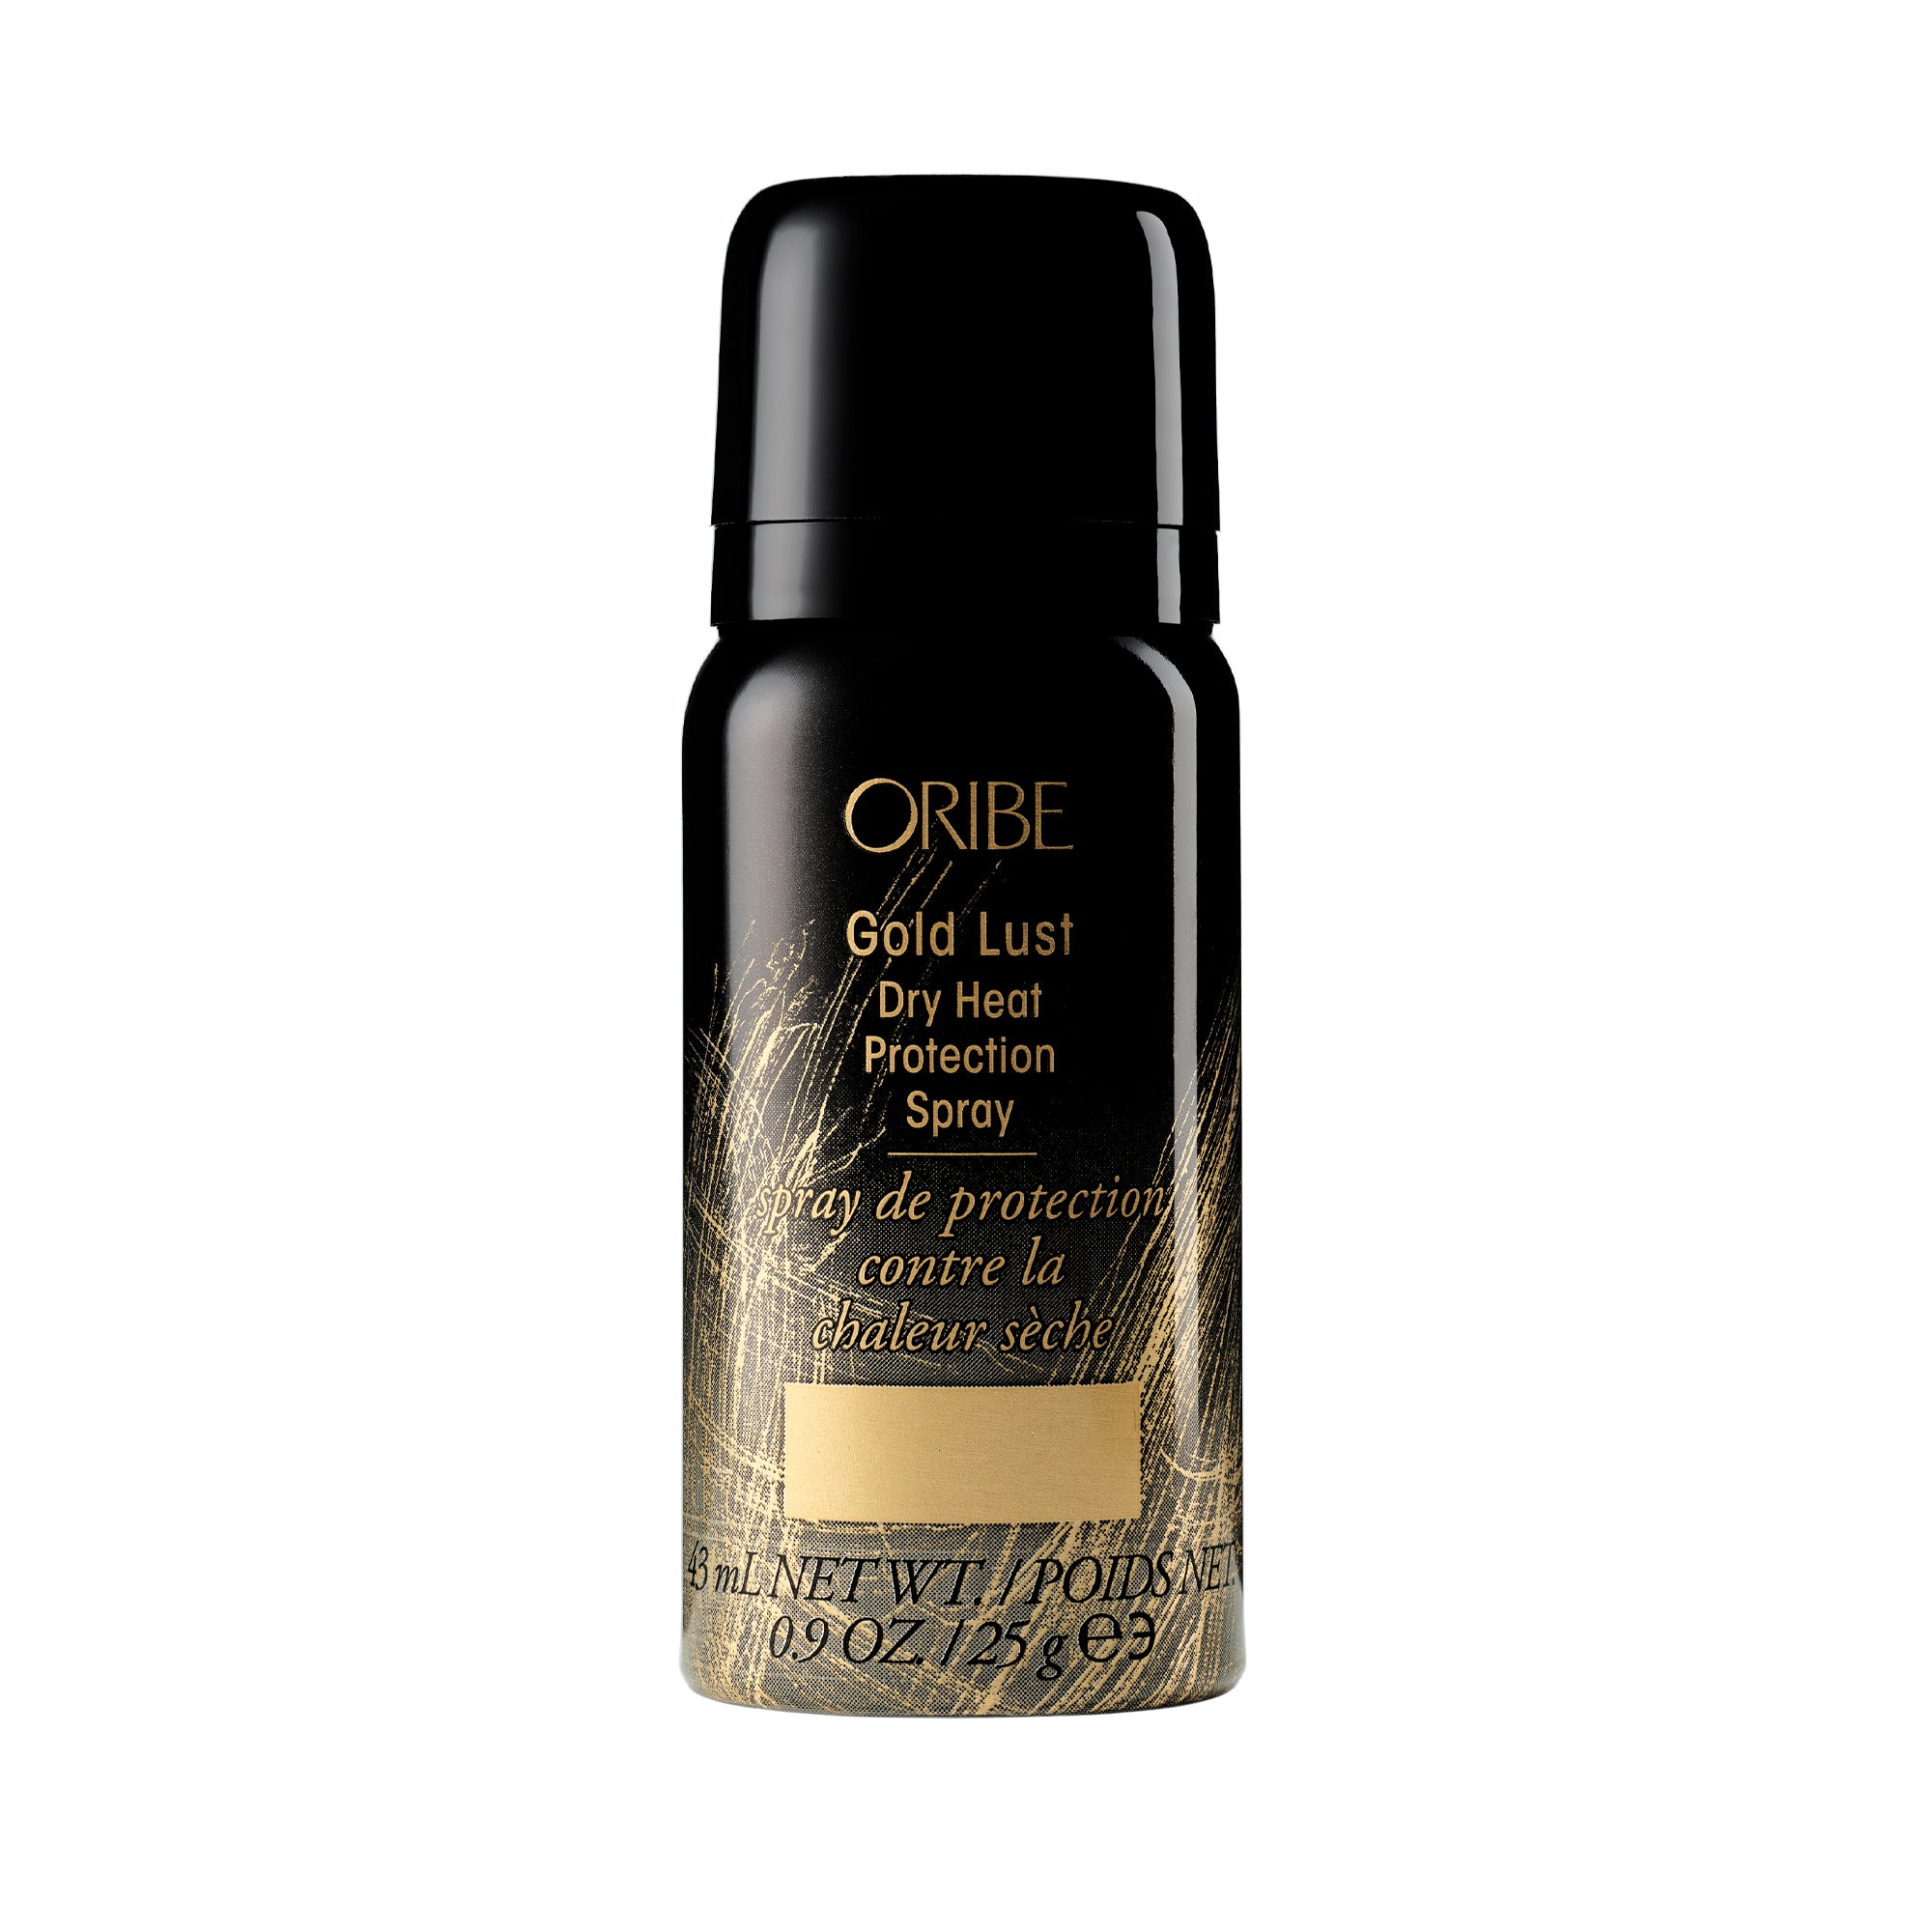 Gold Lust Dry Heat Protection Spray Deluxe Sample